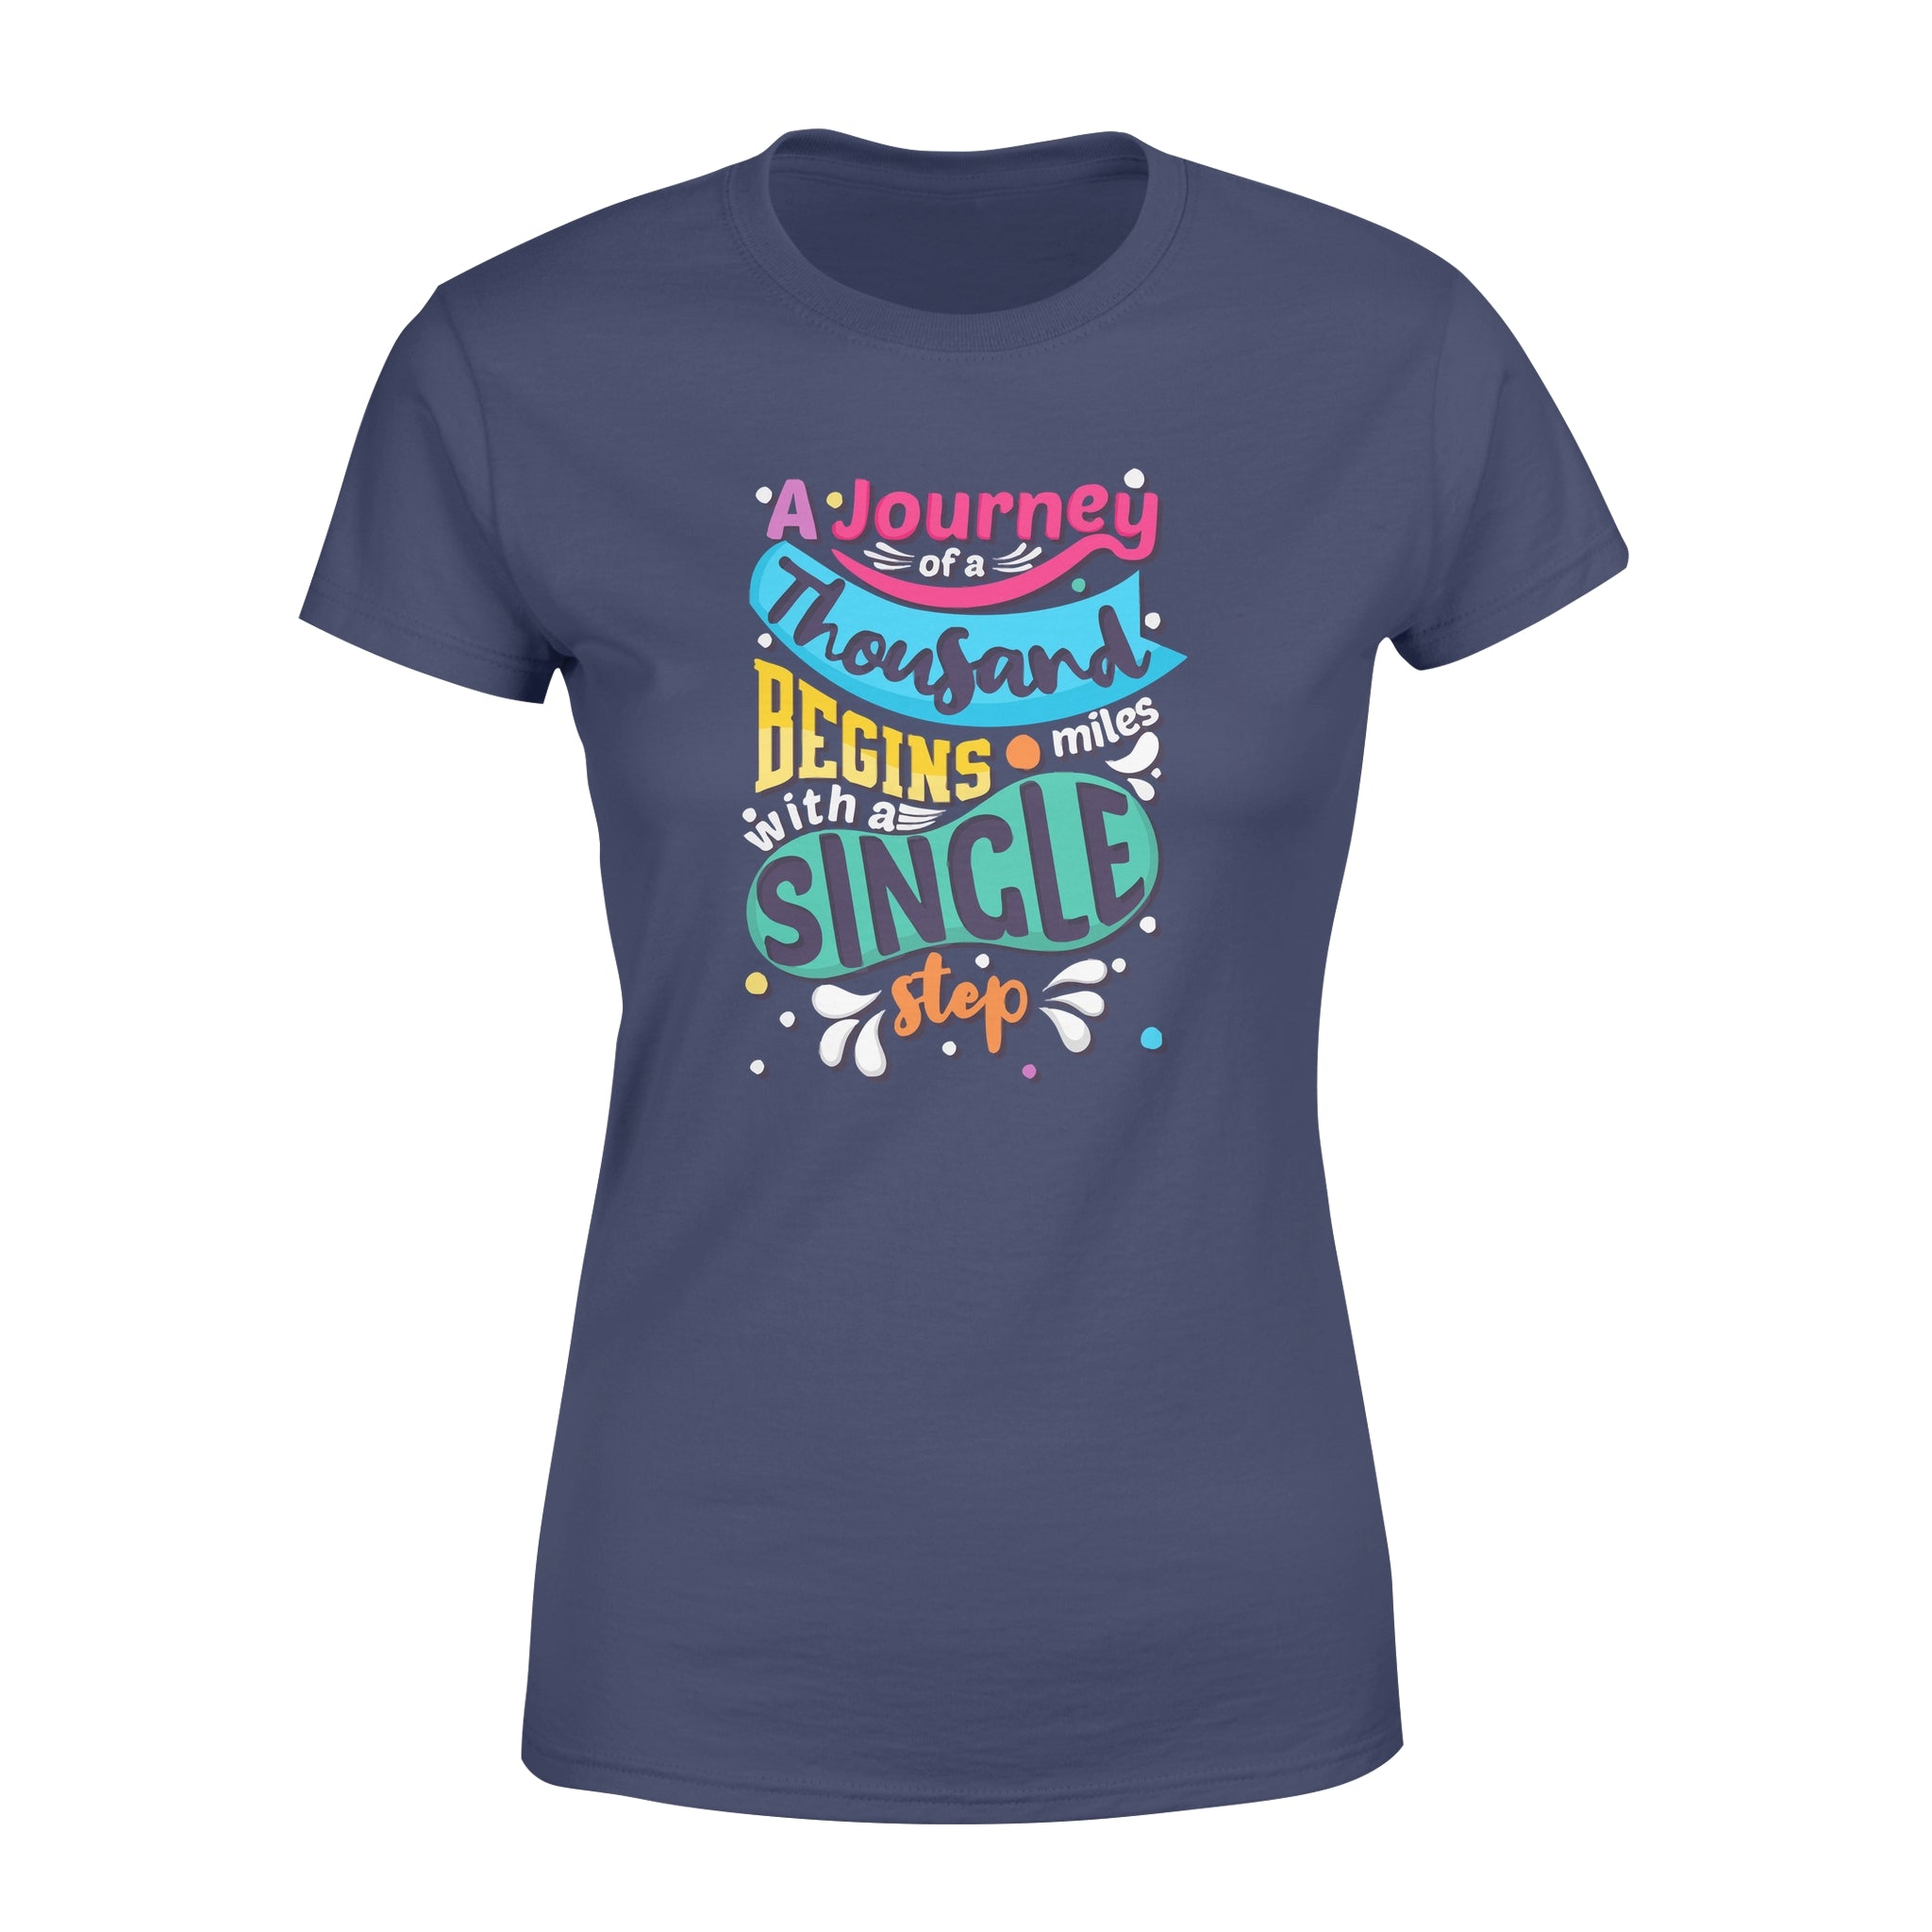 Aj Journey of a Thousand Miles Begins with a Single Step - Women's T-shirt